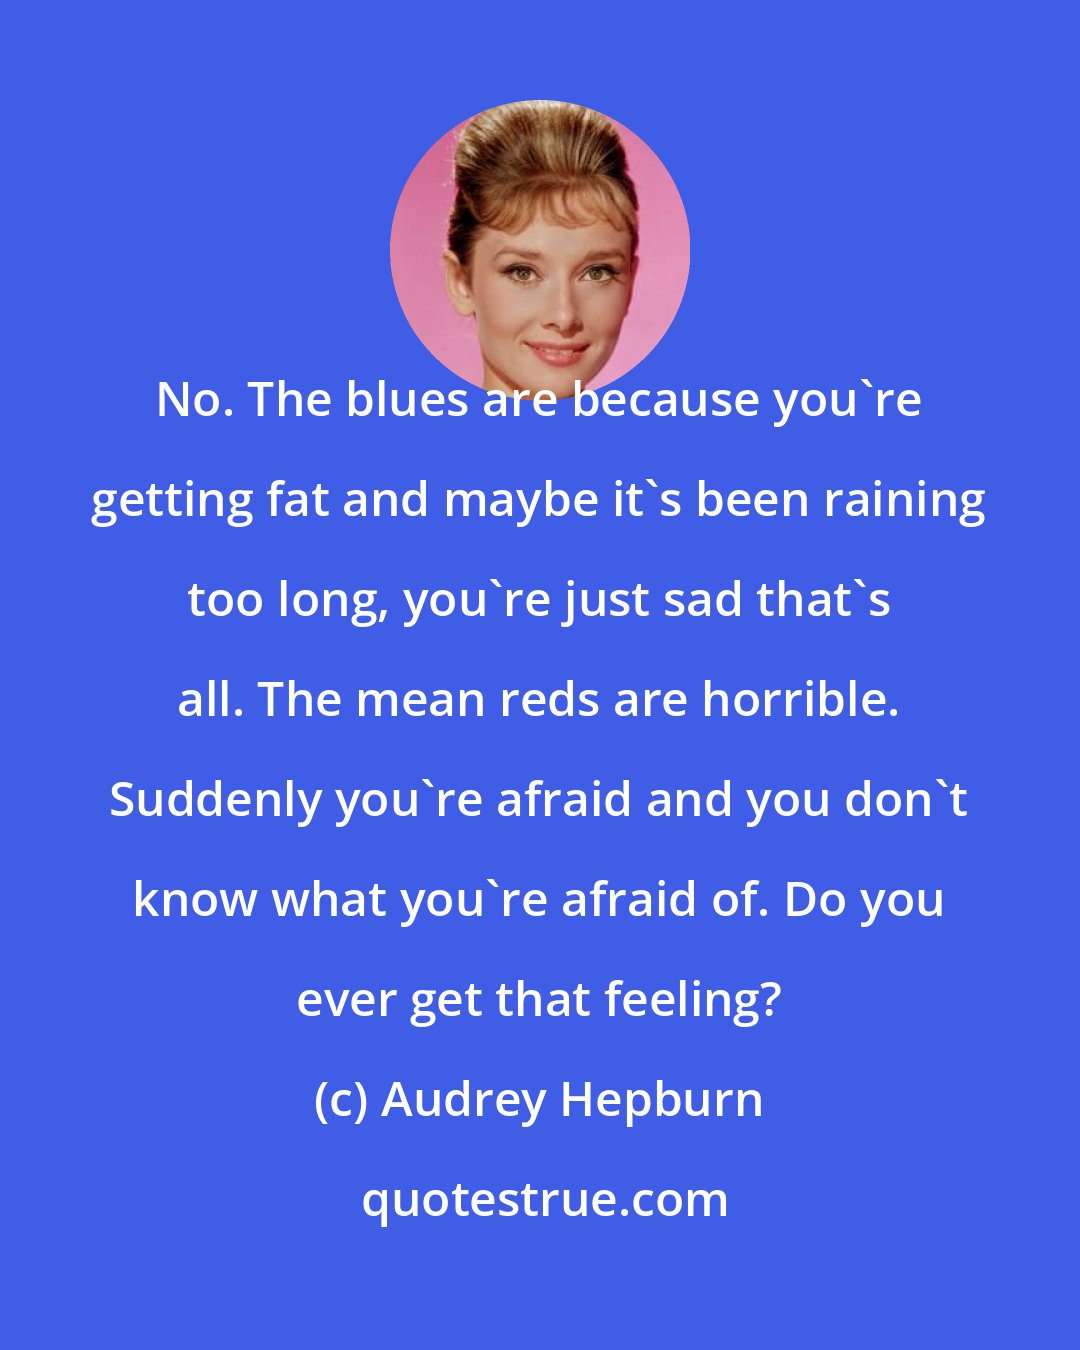 Audrey Hepburn: No. The blues are because you're getting fat and maybe it's been raining too long, you're just sad that's all. The mean reds are horrible. Suddenly you're afraid and you don't know what you're afraid of. Do you ever get that feeling?